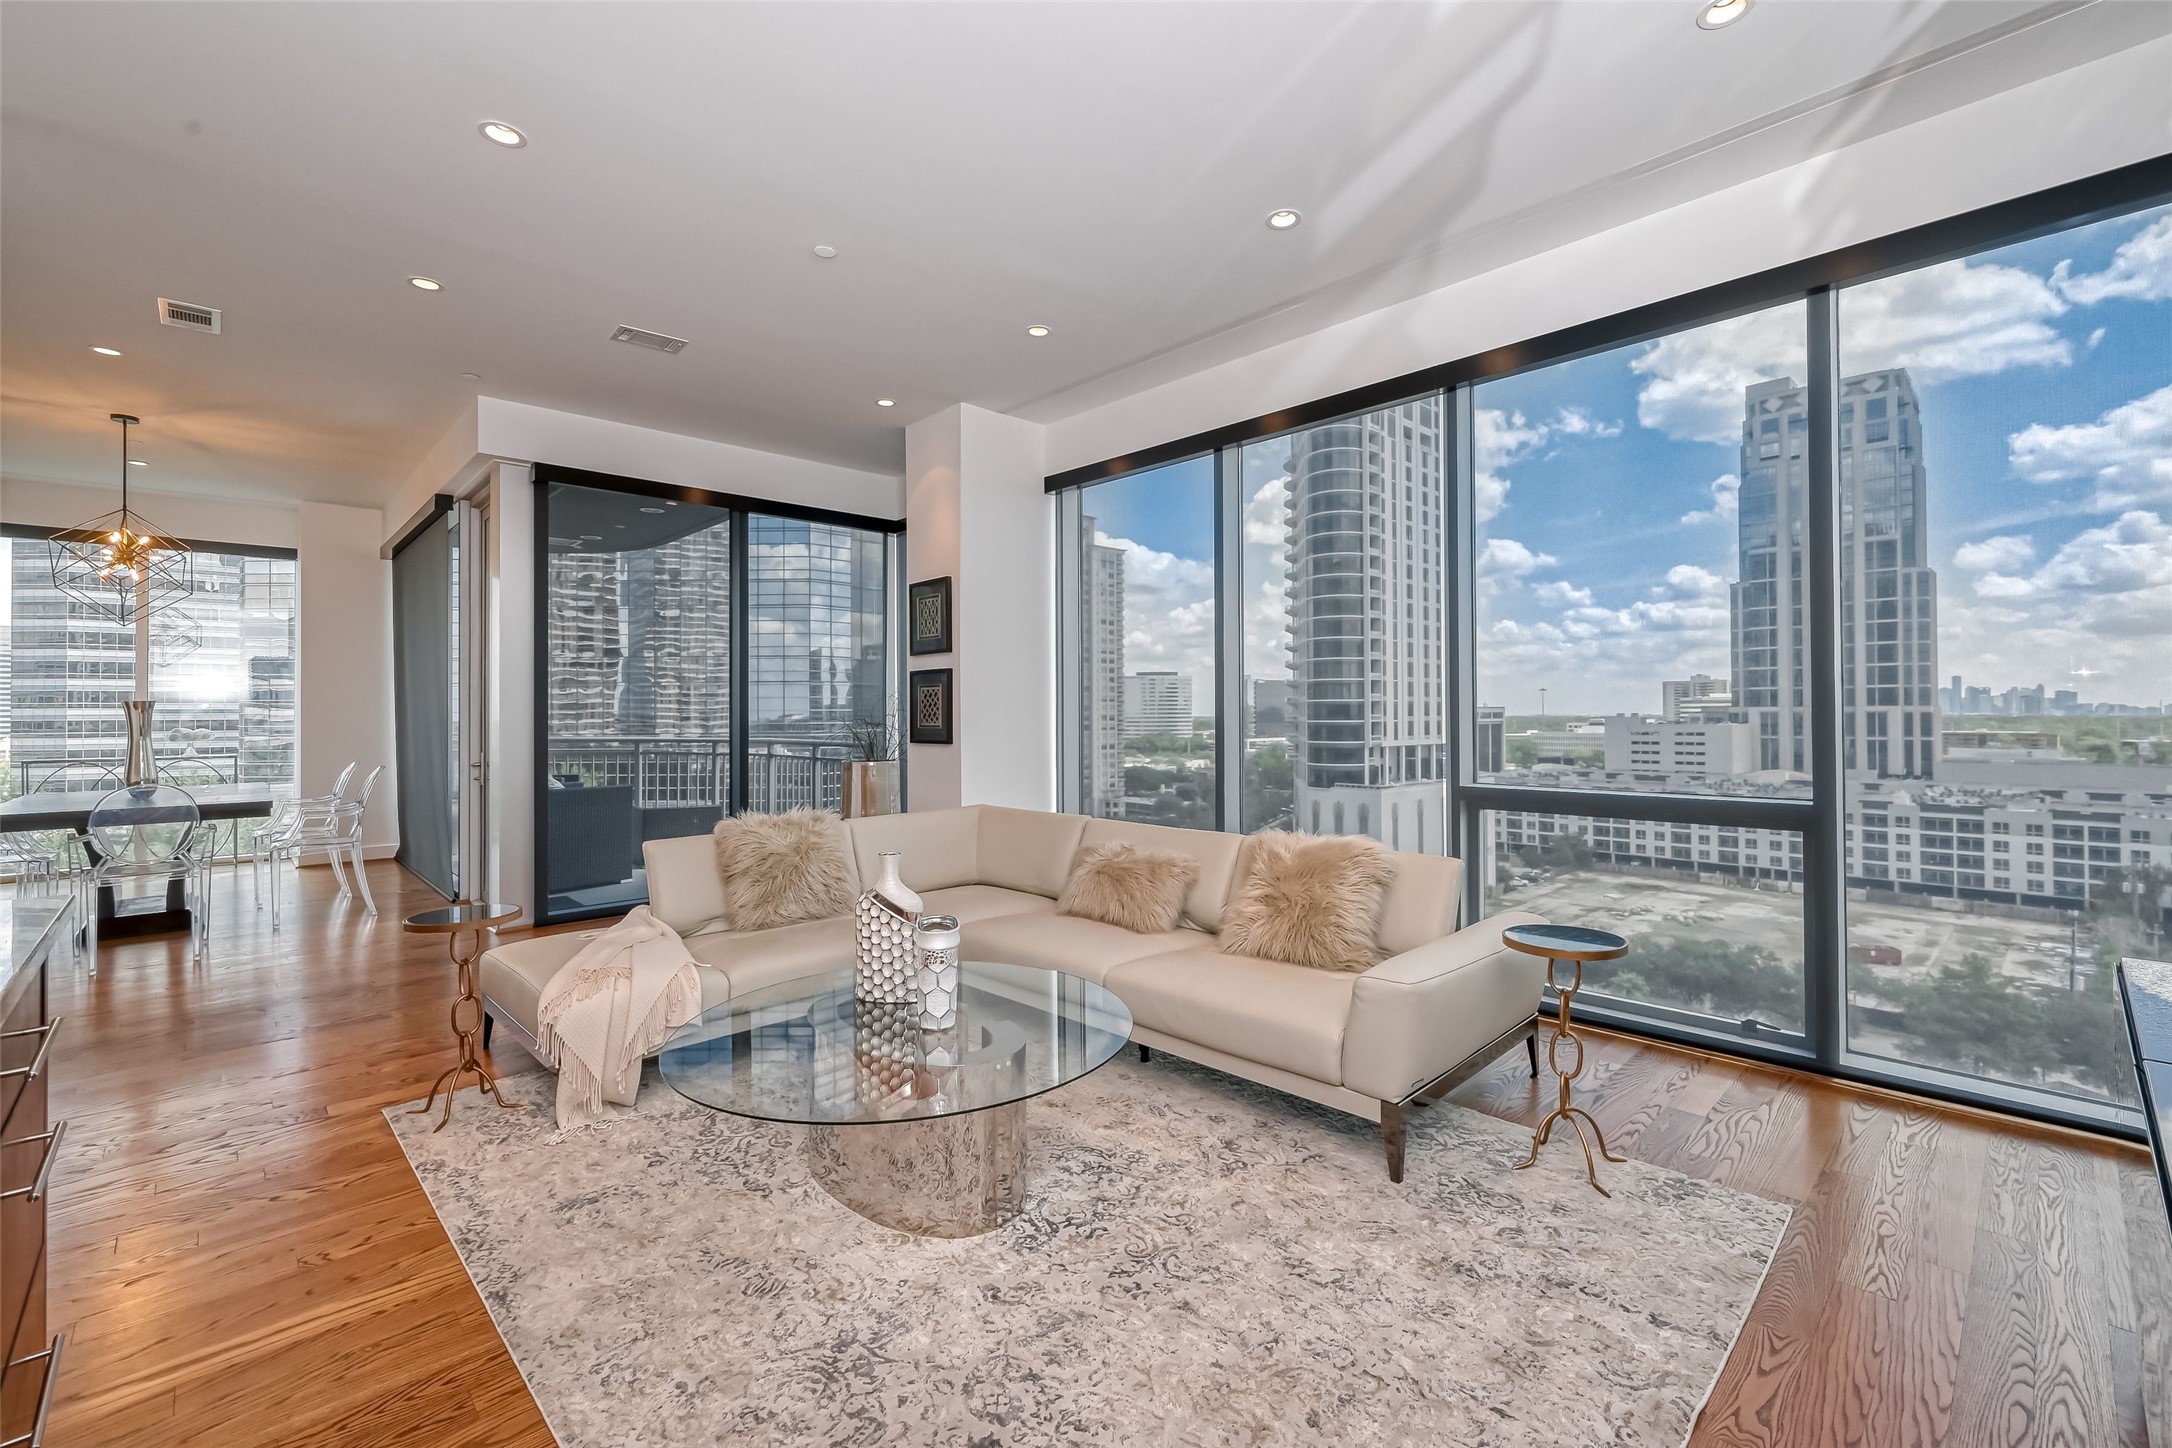 Surrounded by walls of windows with automatic shades providing exquisite views, this beautiful open concept unit features a spacious Family Room which opens to the Kitchen and Dining Room and features hardwood floors.